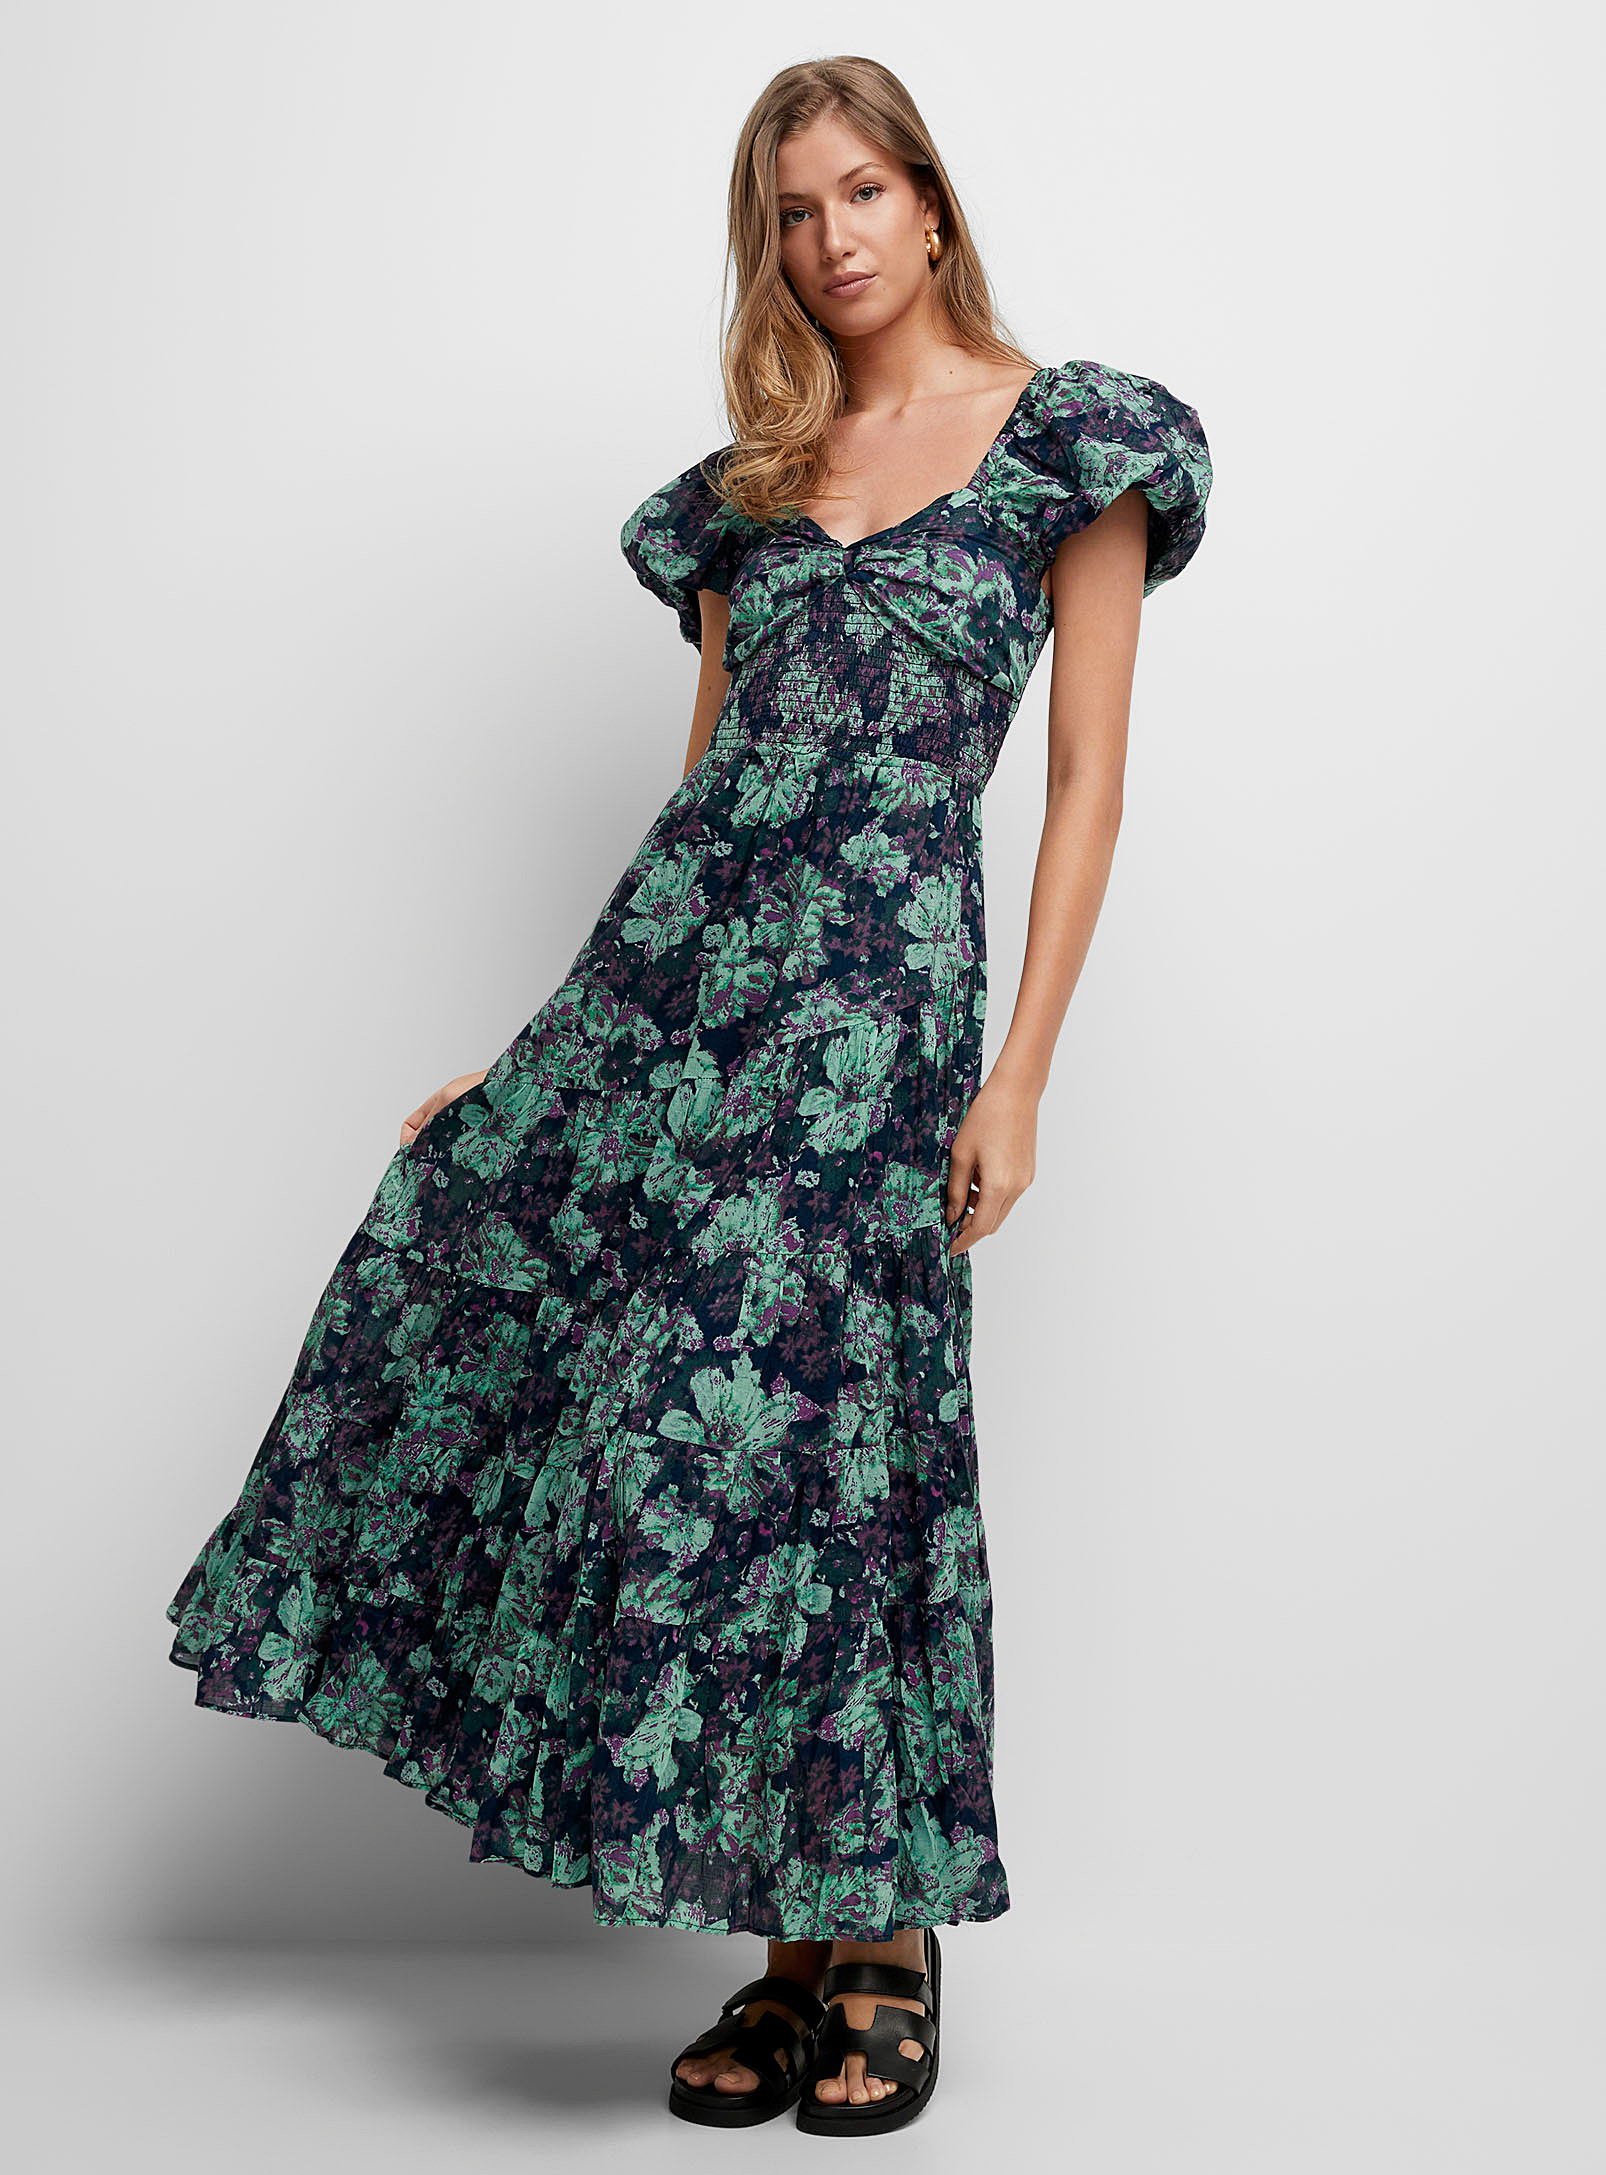 Free People - Women's Sundrenche nocturnal flowers long tiered dress